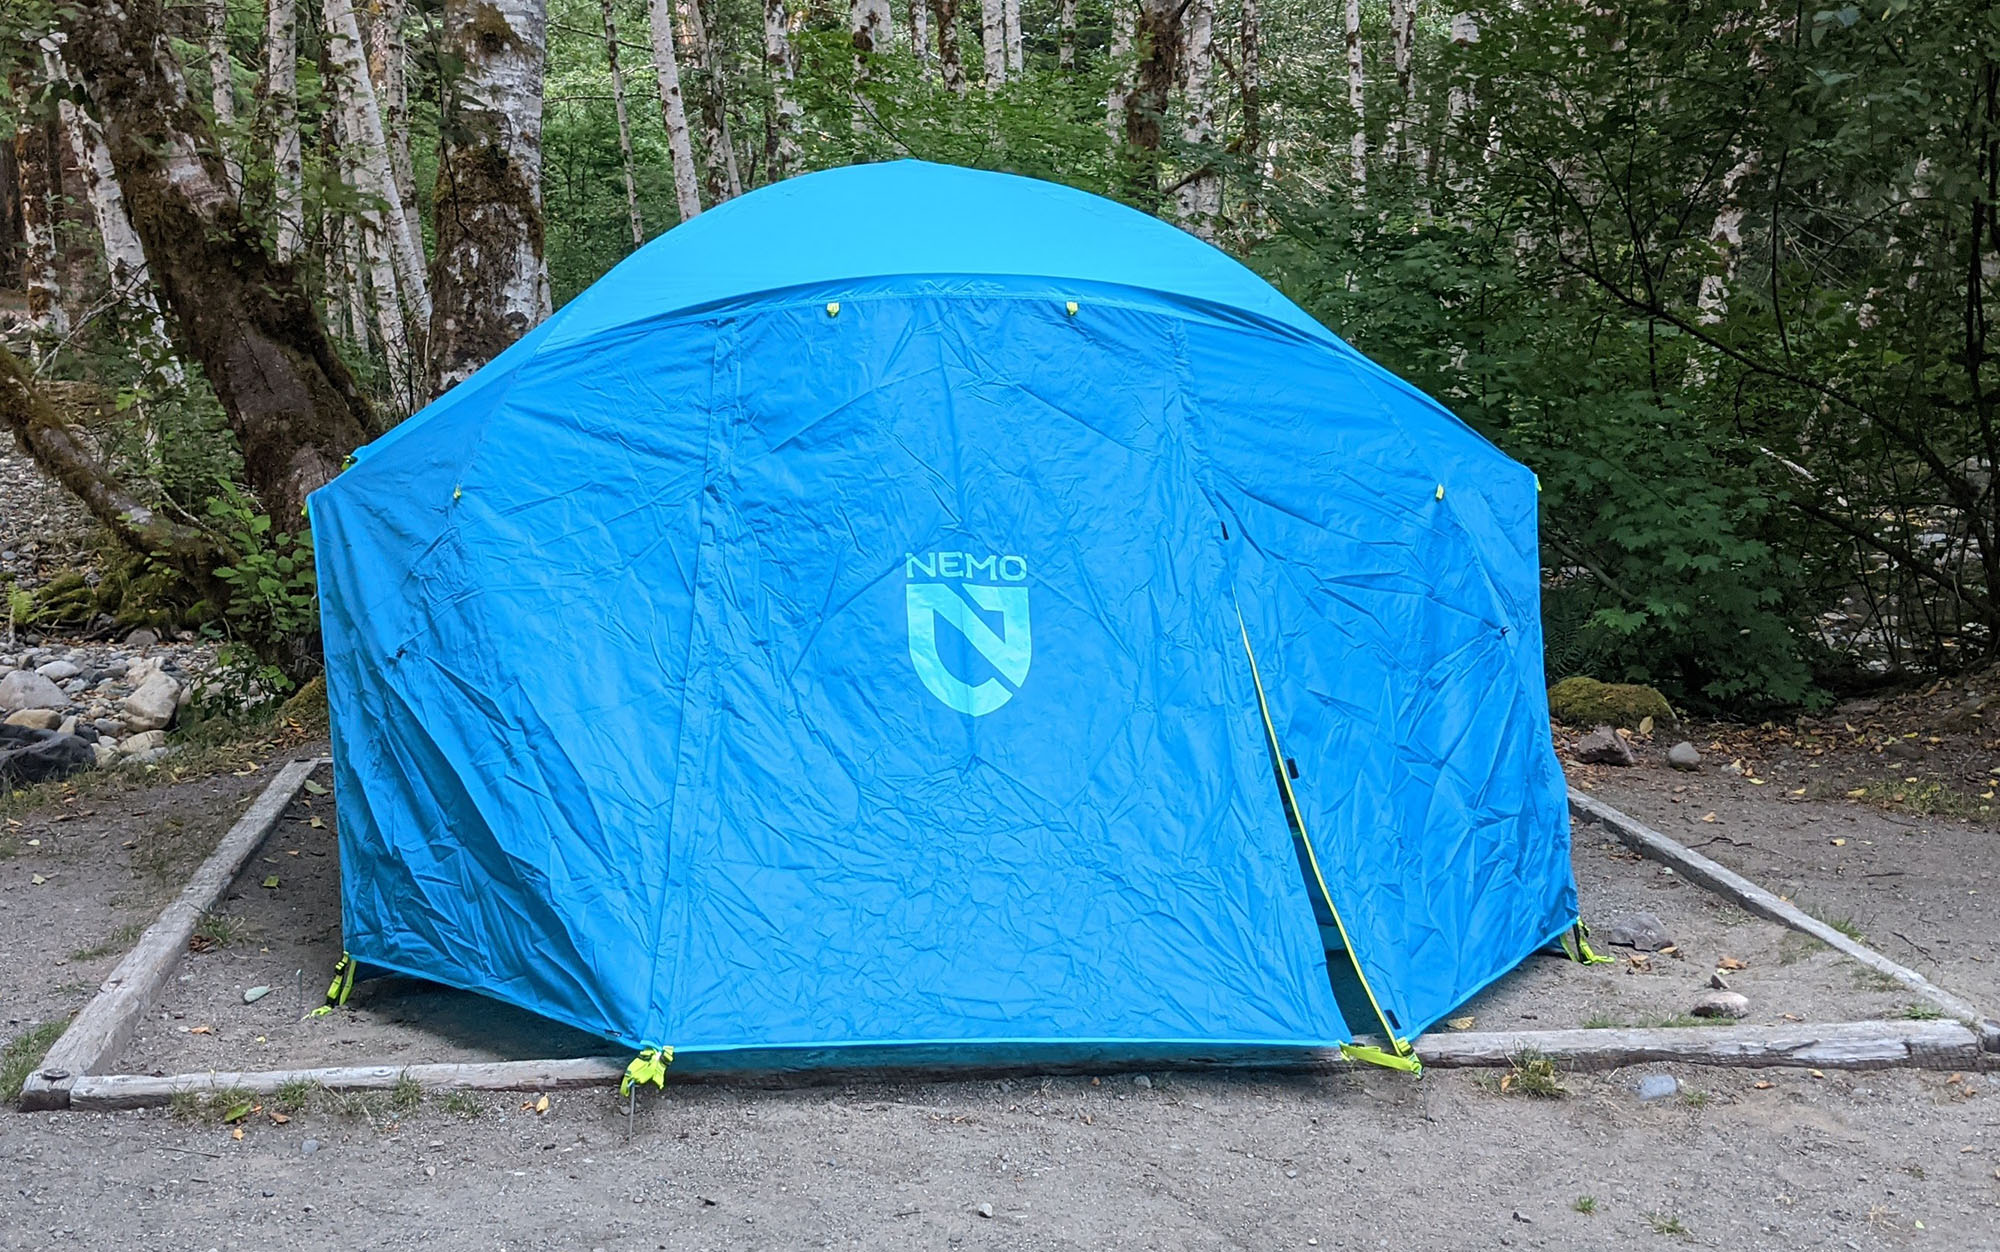 Camping gear for your next weekend escape